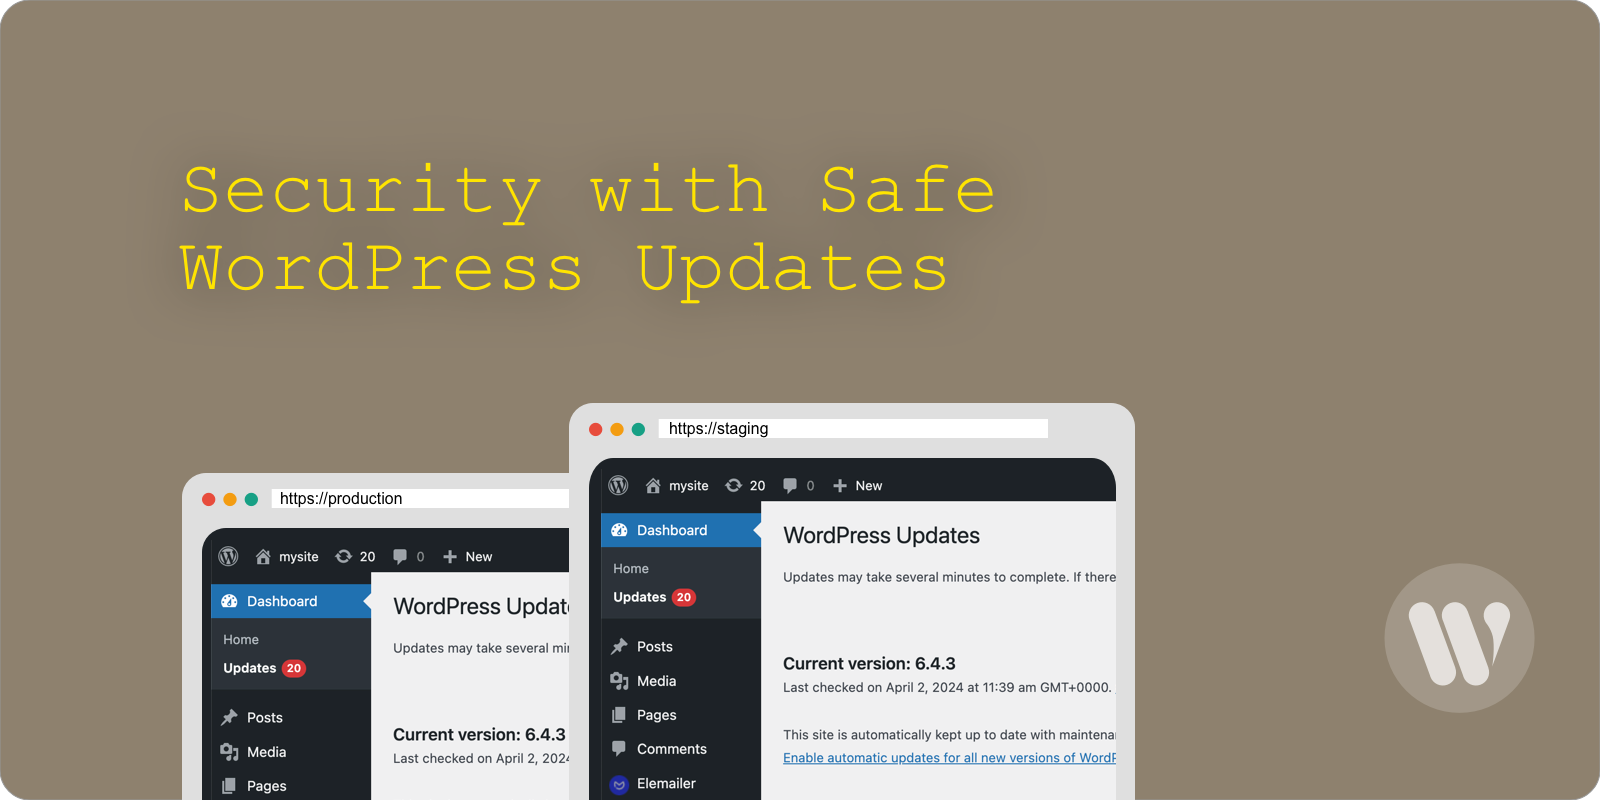 Security with Safe WordPress Updates